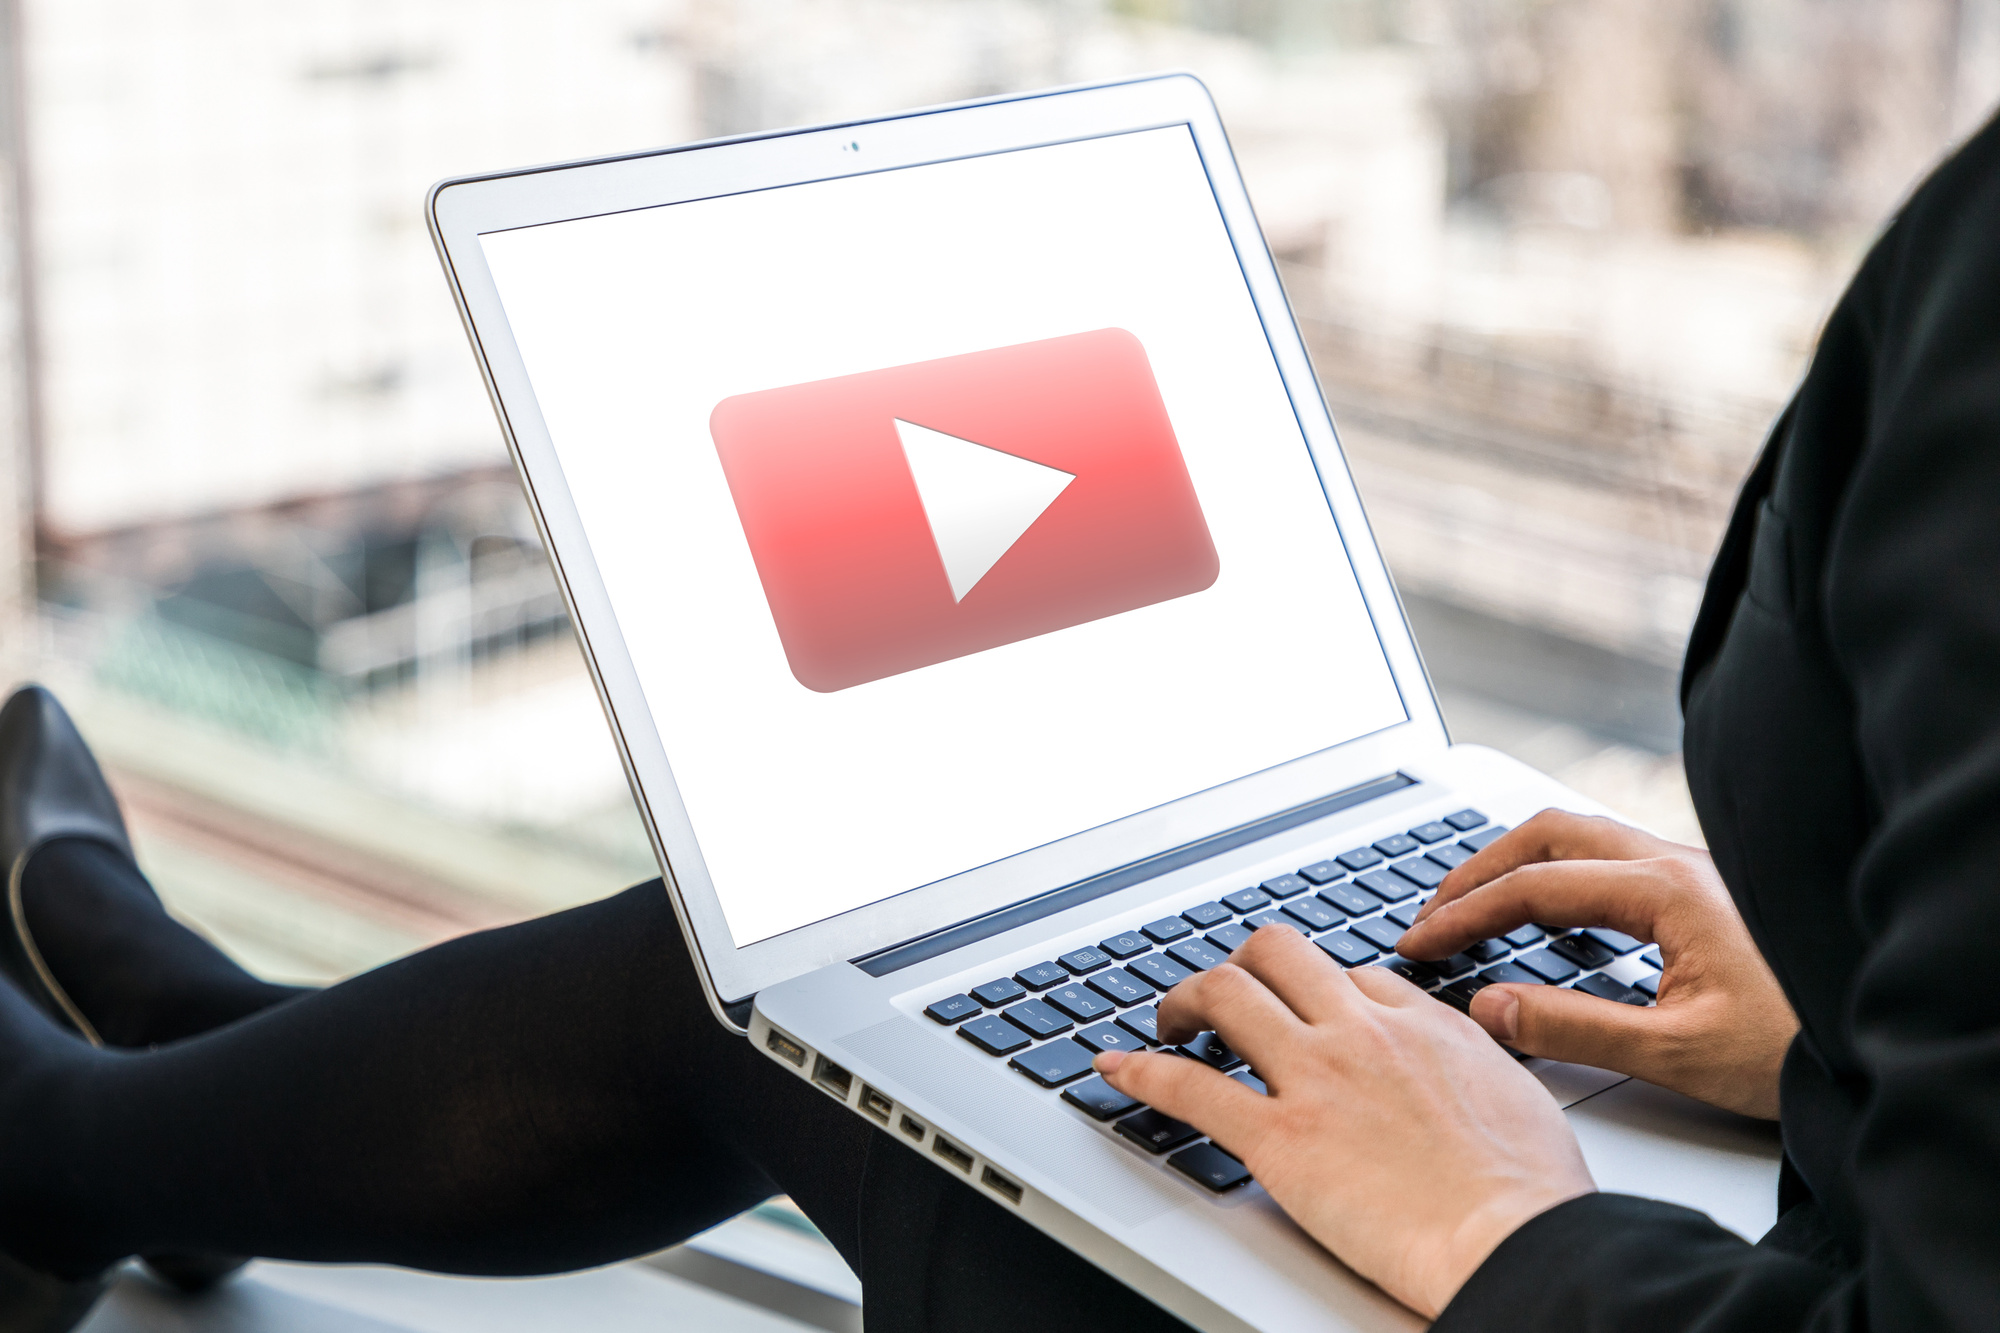 7 SEO Tools to Use for Better Youtube Video Promotion | WebConfs.com